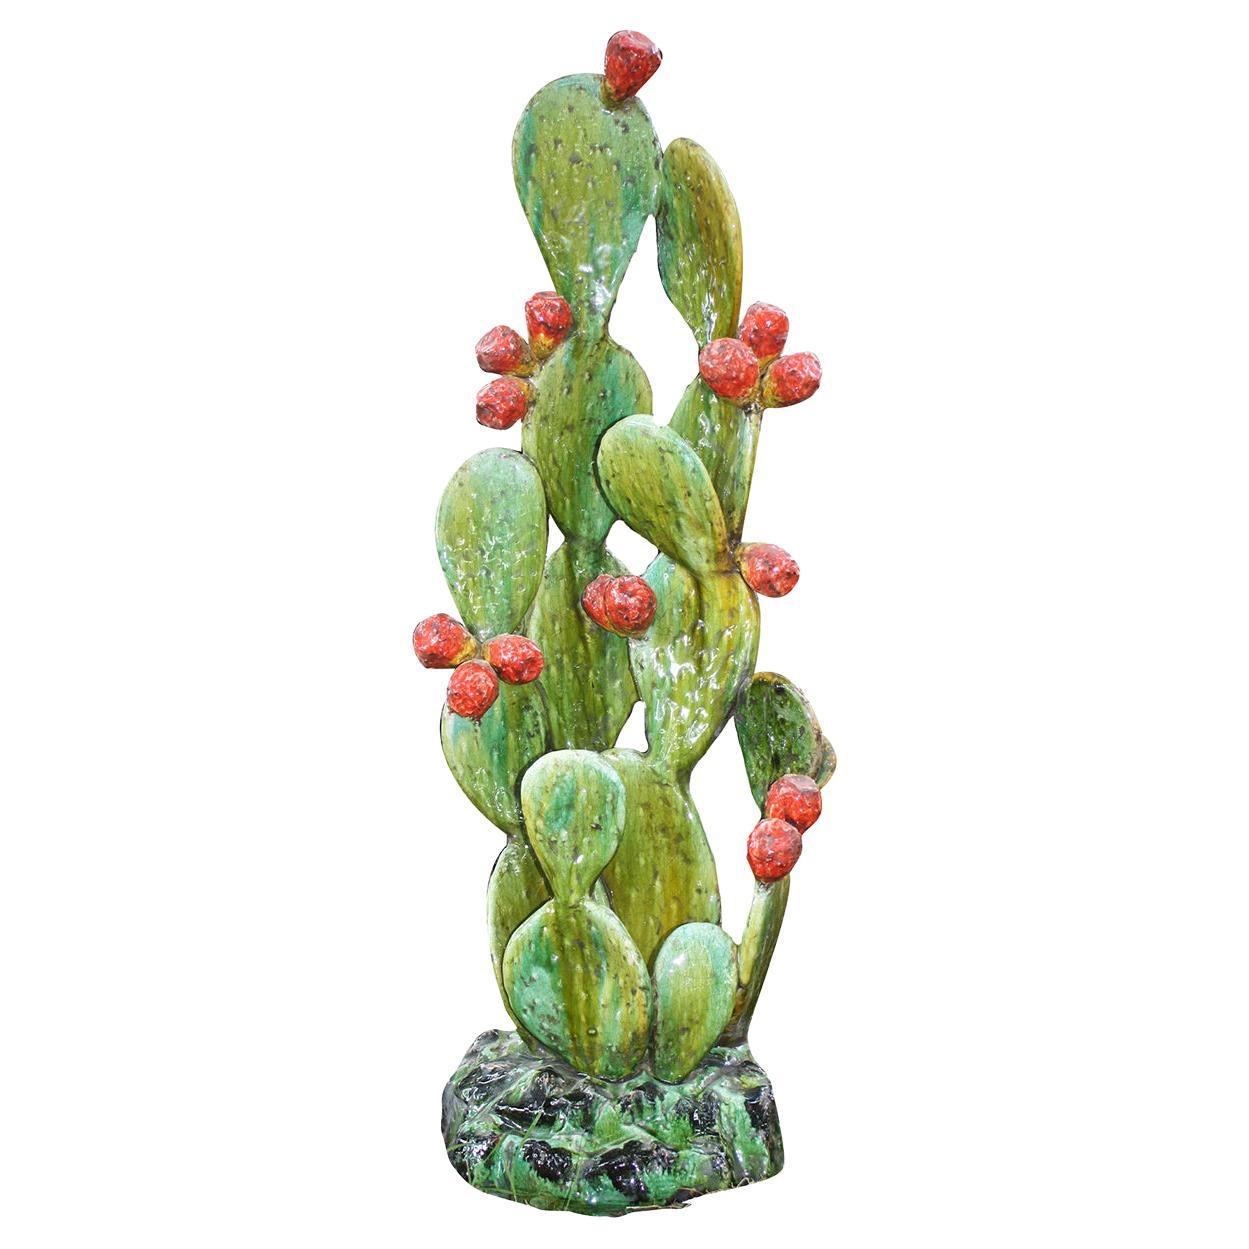 Pickly Pear Polychrome Sculpture